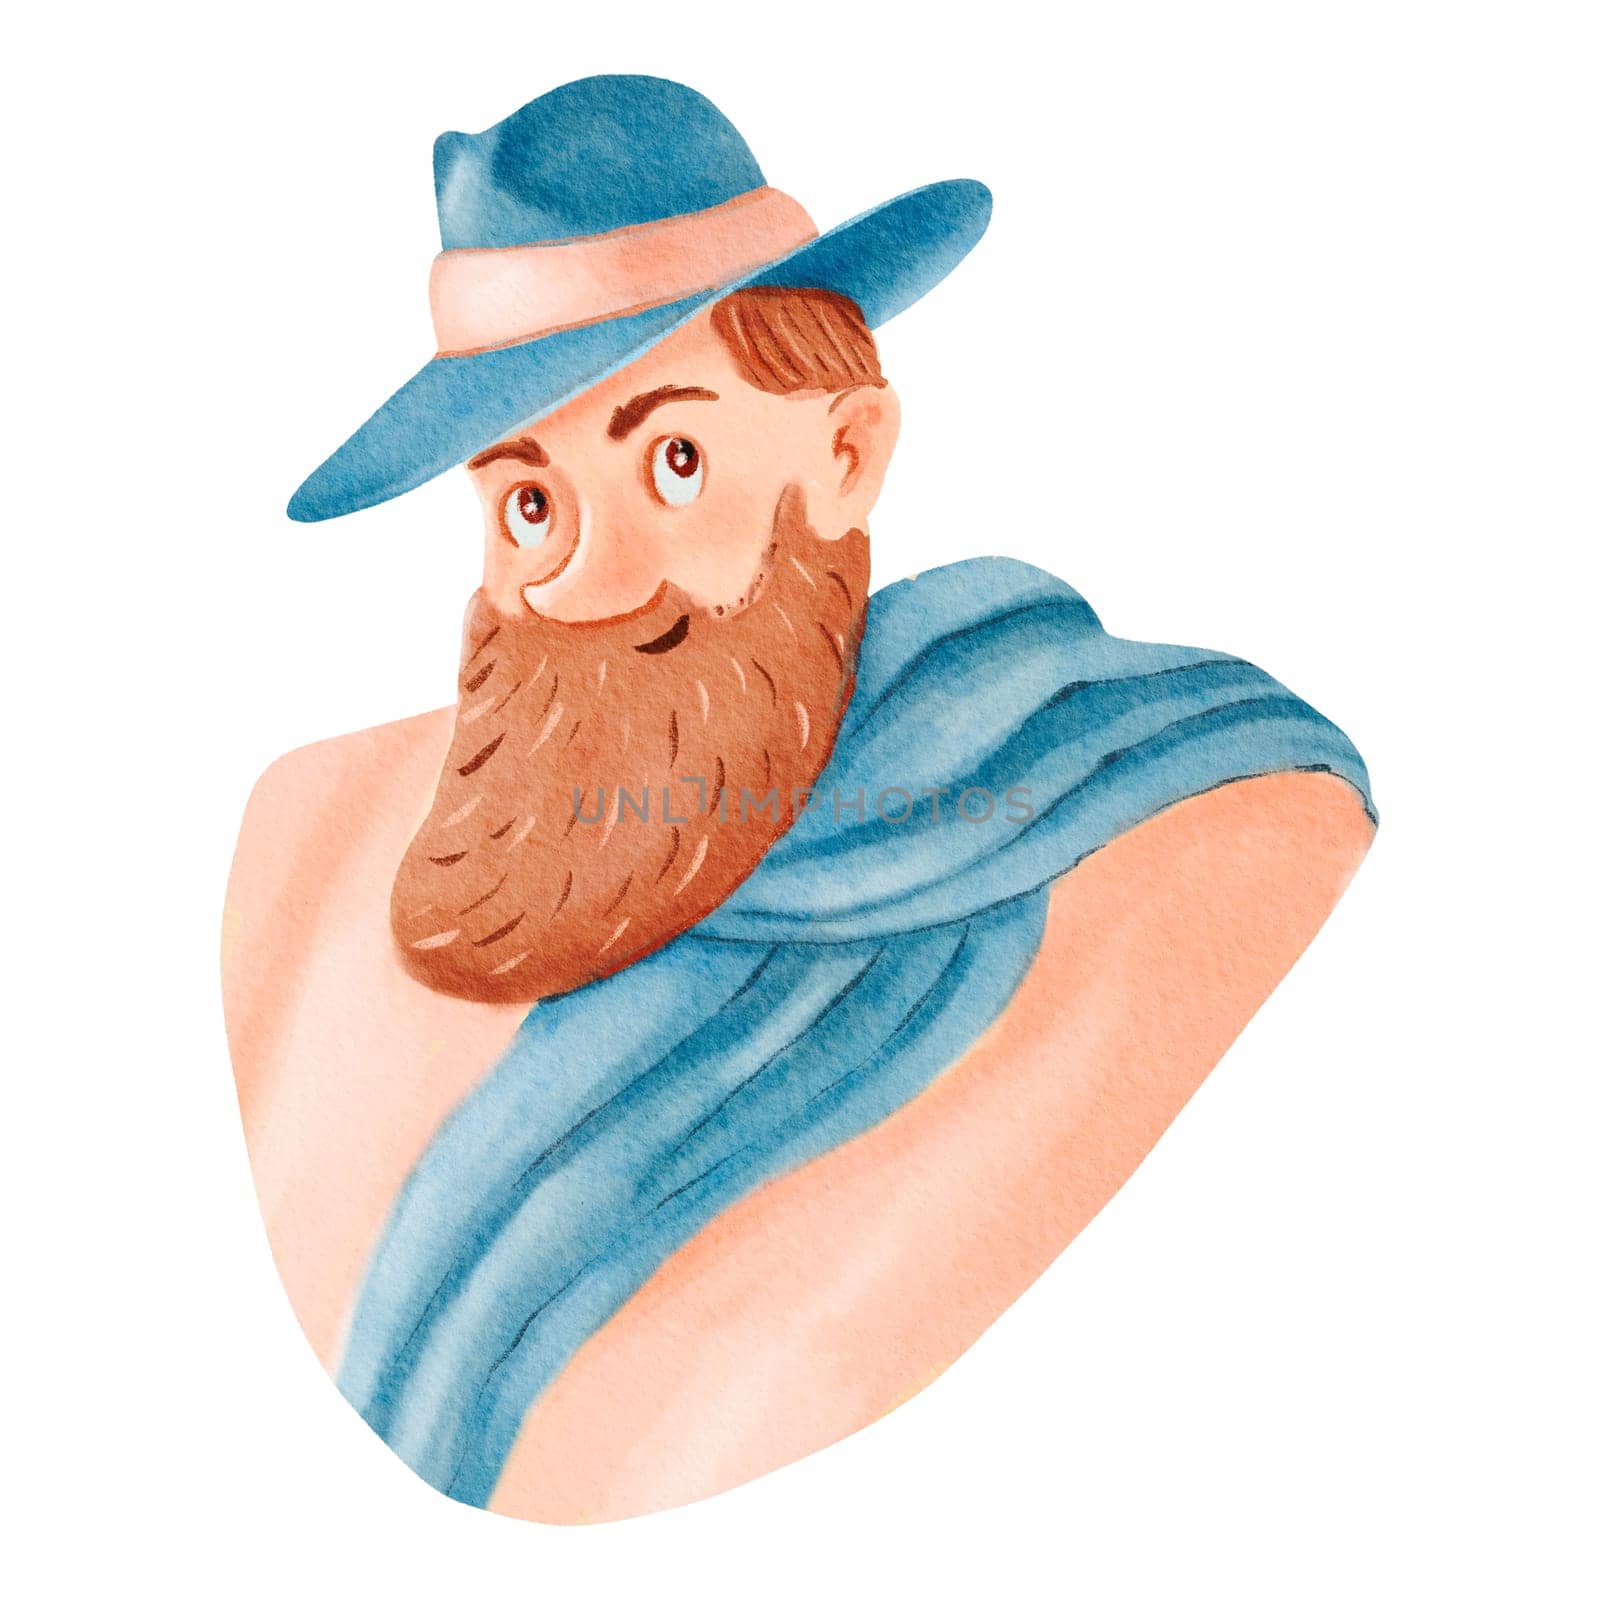 Man with blue costume hat, scarf, and beard making a gesture by Art_Mari_Ka